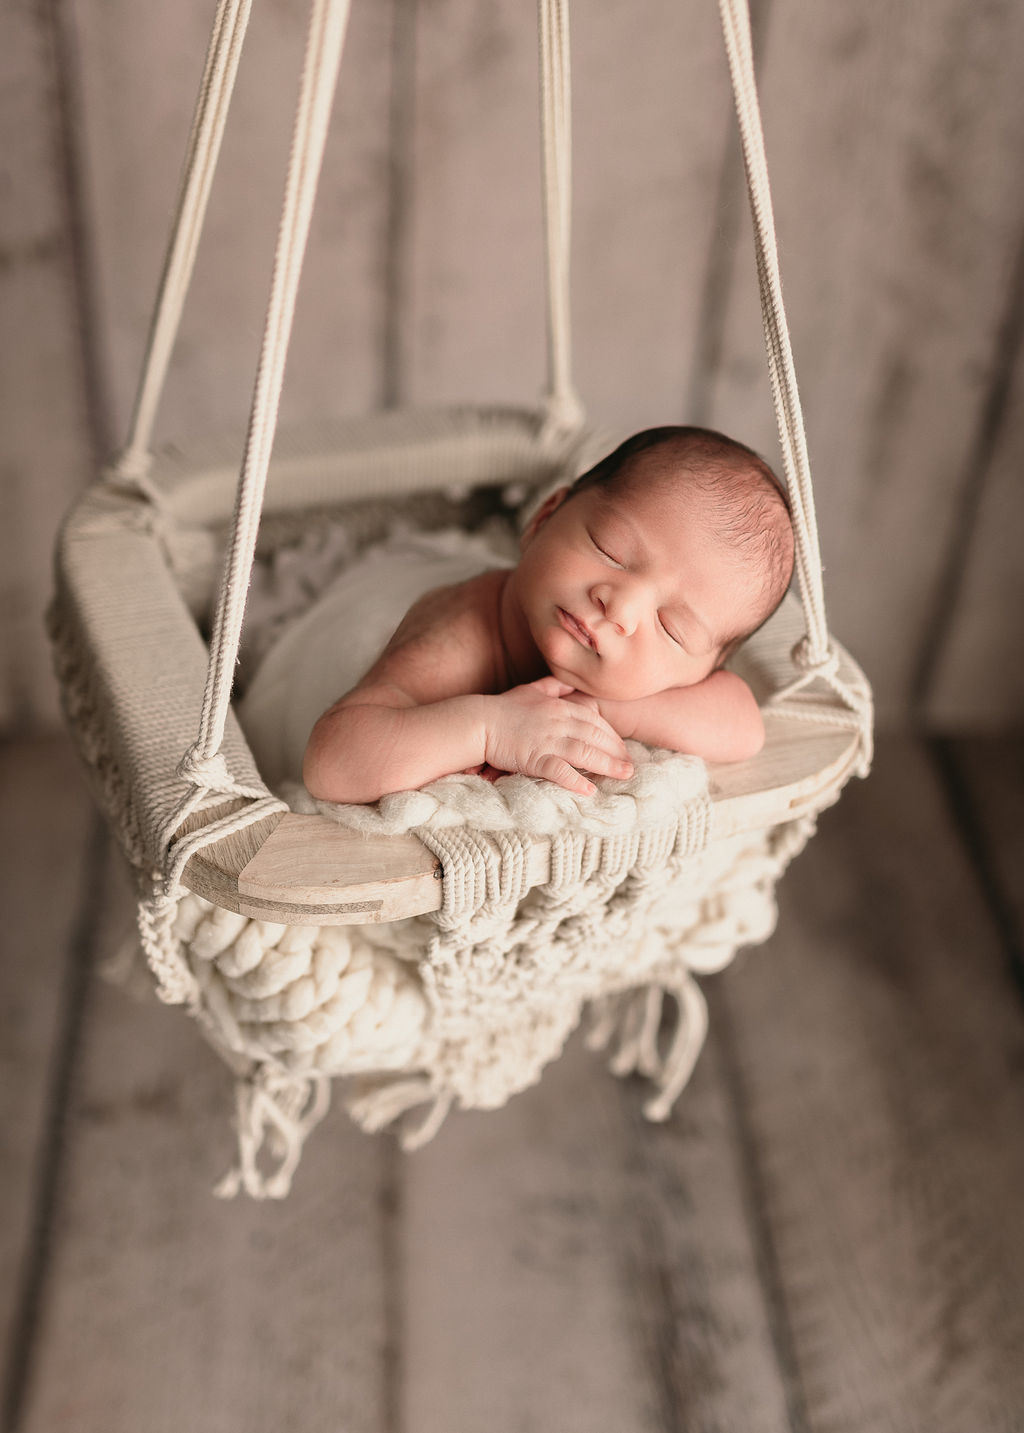 newborn baby laying on it's hands in a swing Dr. Cherry Klamath Falls